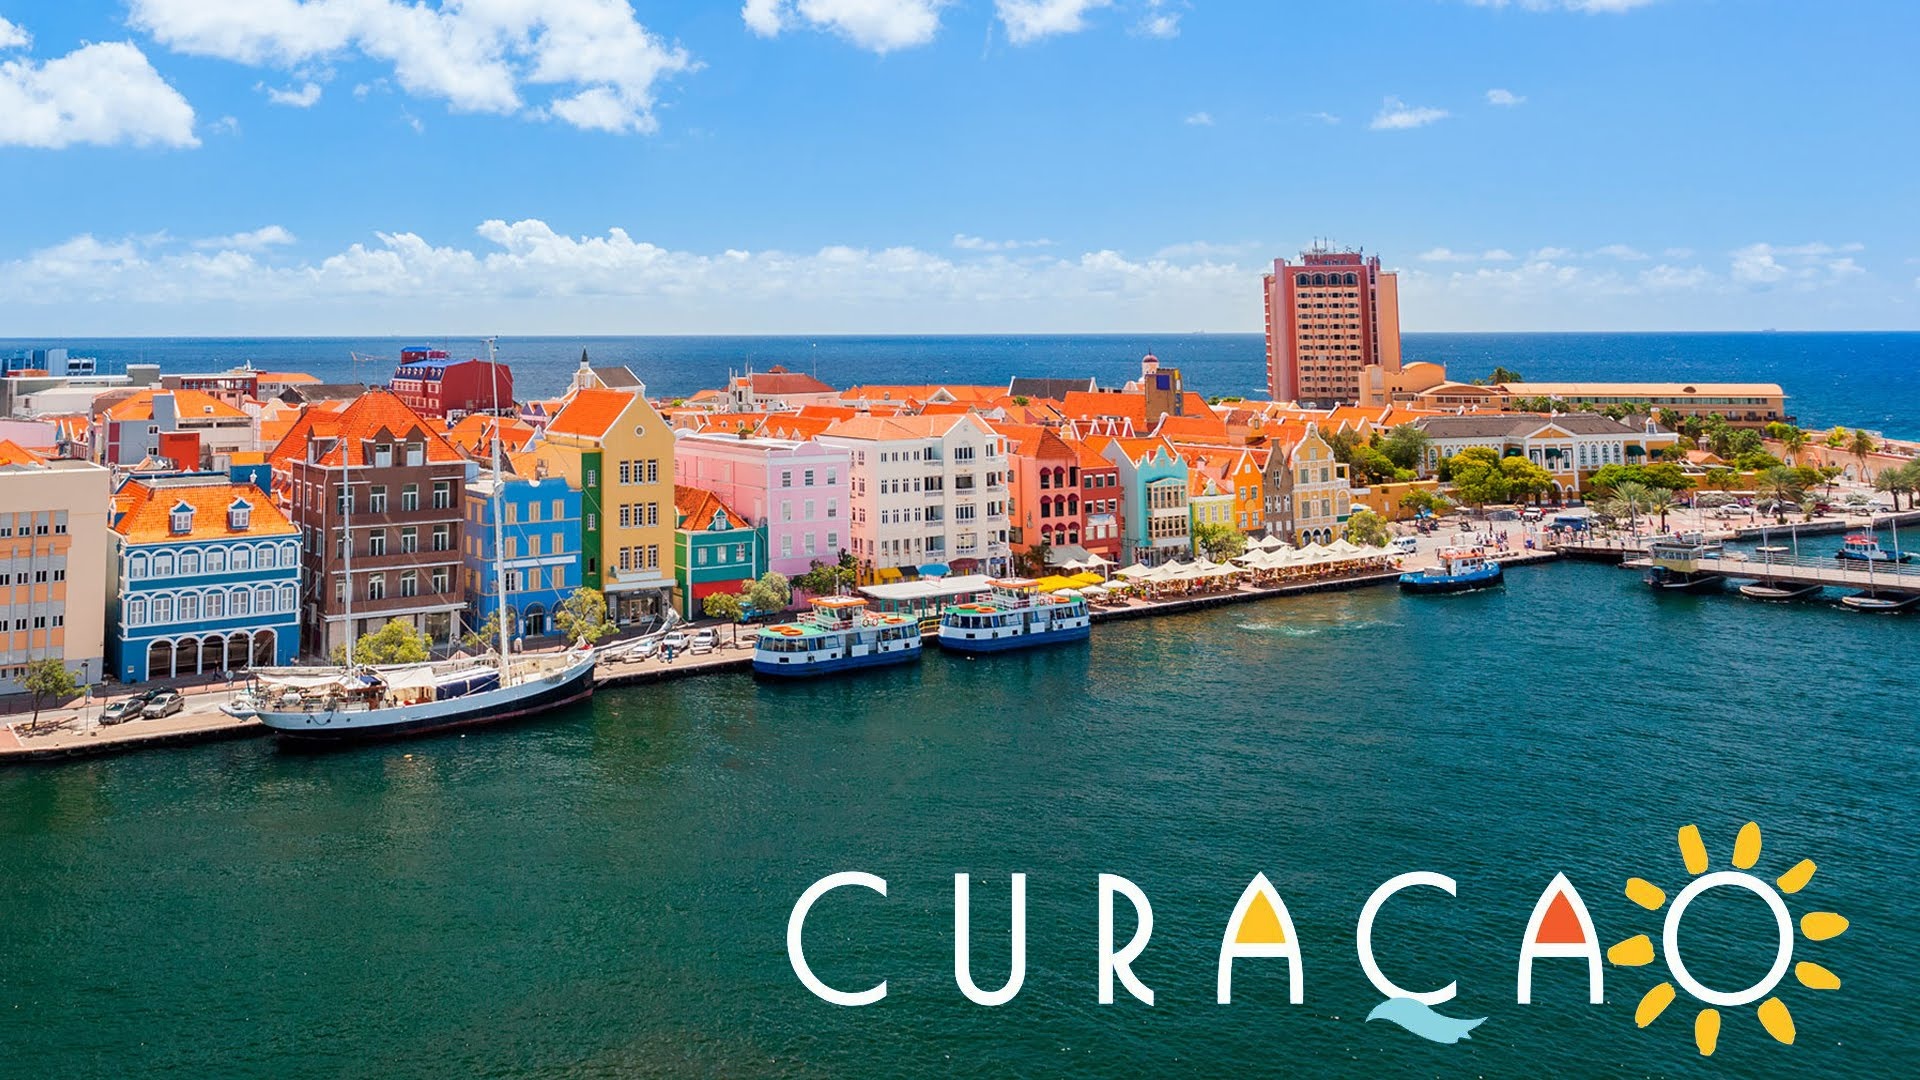 Curacao wallpapers, Top free, Curacao backgrounds, Caribbean island, 1920x1080 Full HD Desktop